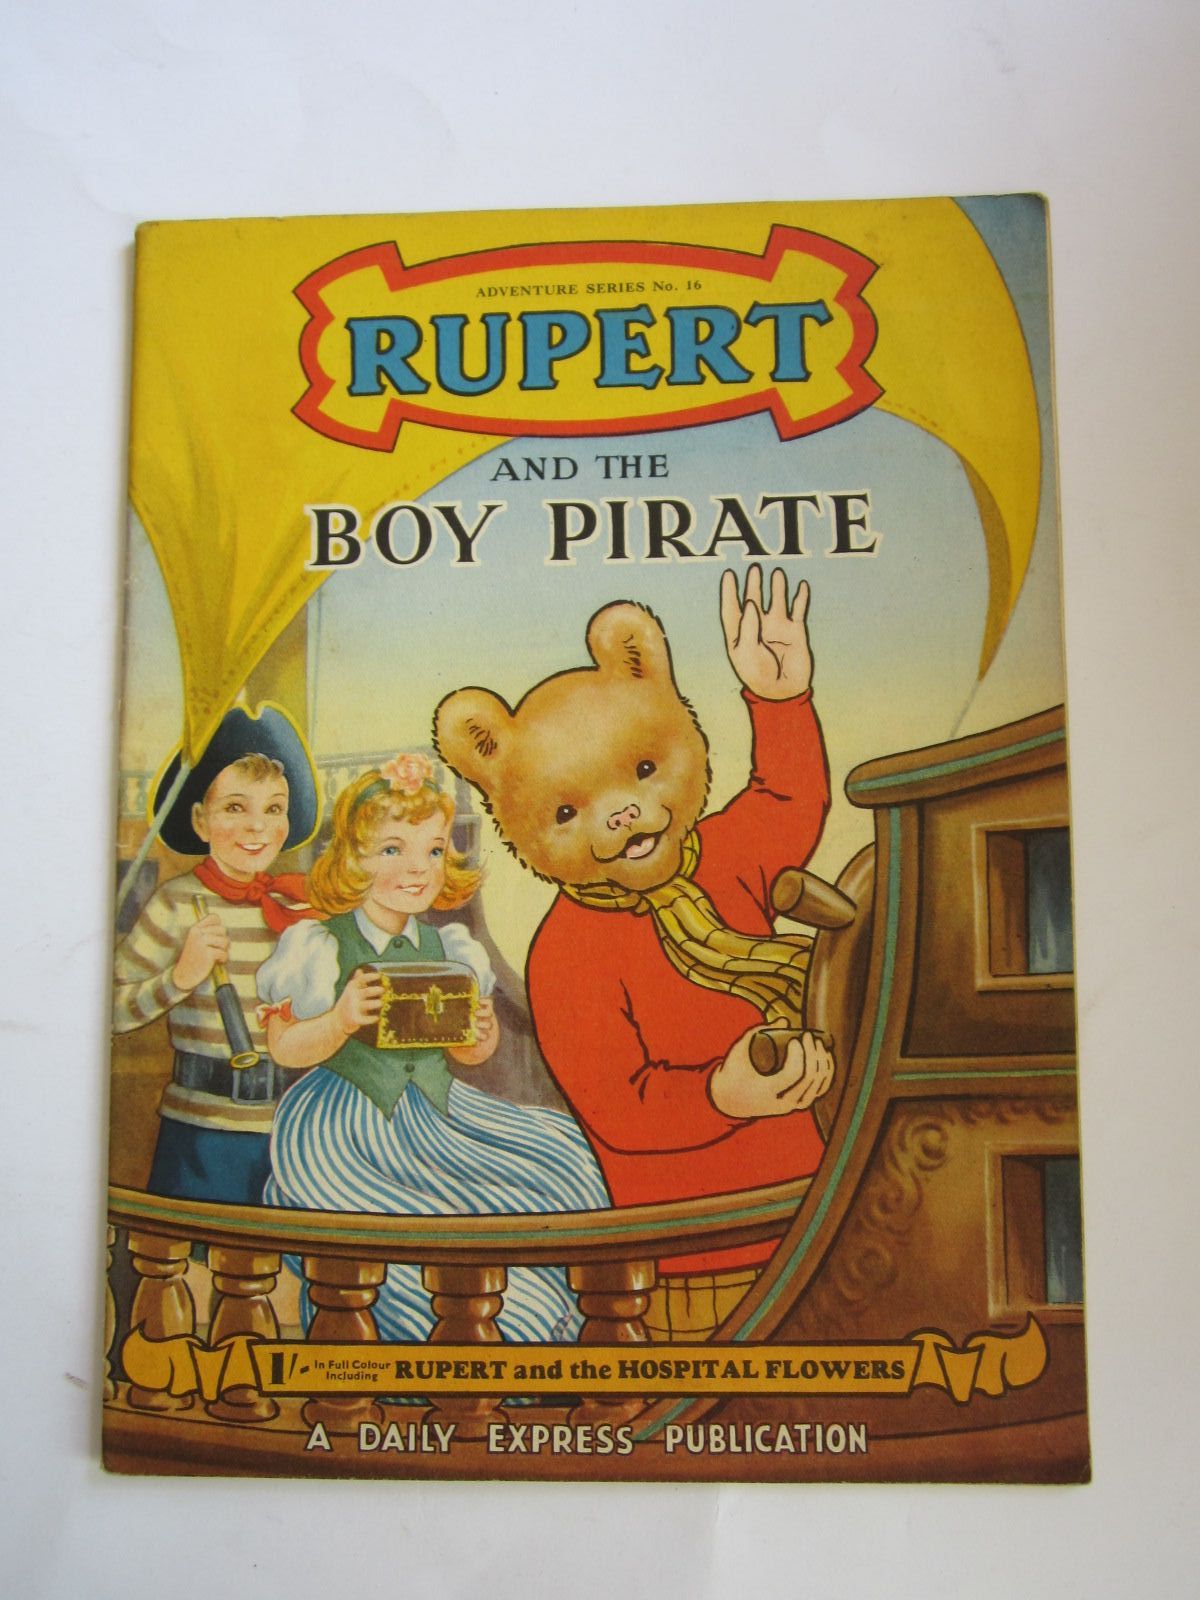 Photo of RUPERT ADVENTURE SERIES No. 16 - RUPERT AND THE BOY PIRATE written by Bestall, Alfred published by Daily Express (STOCK CODE: 1206518)  for sale by Stella & Rose's Books